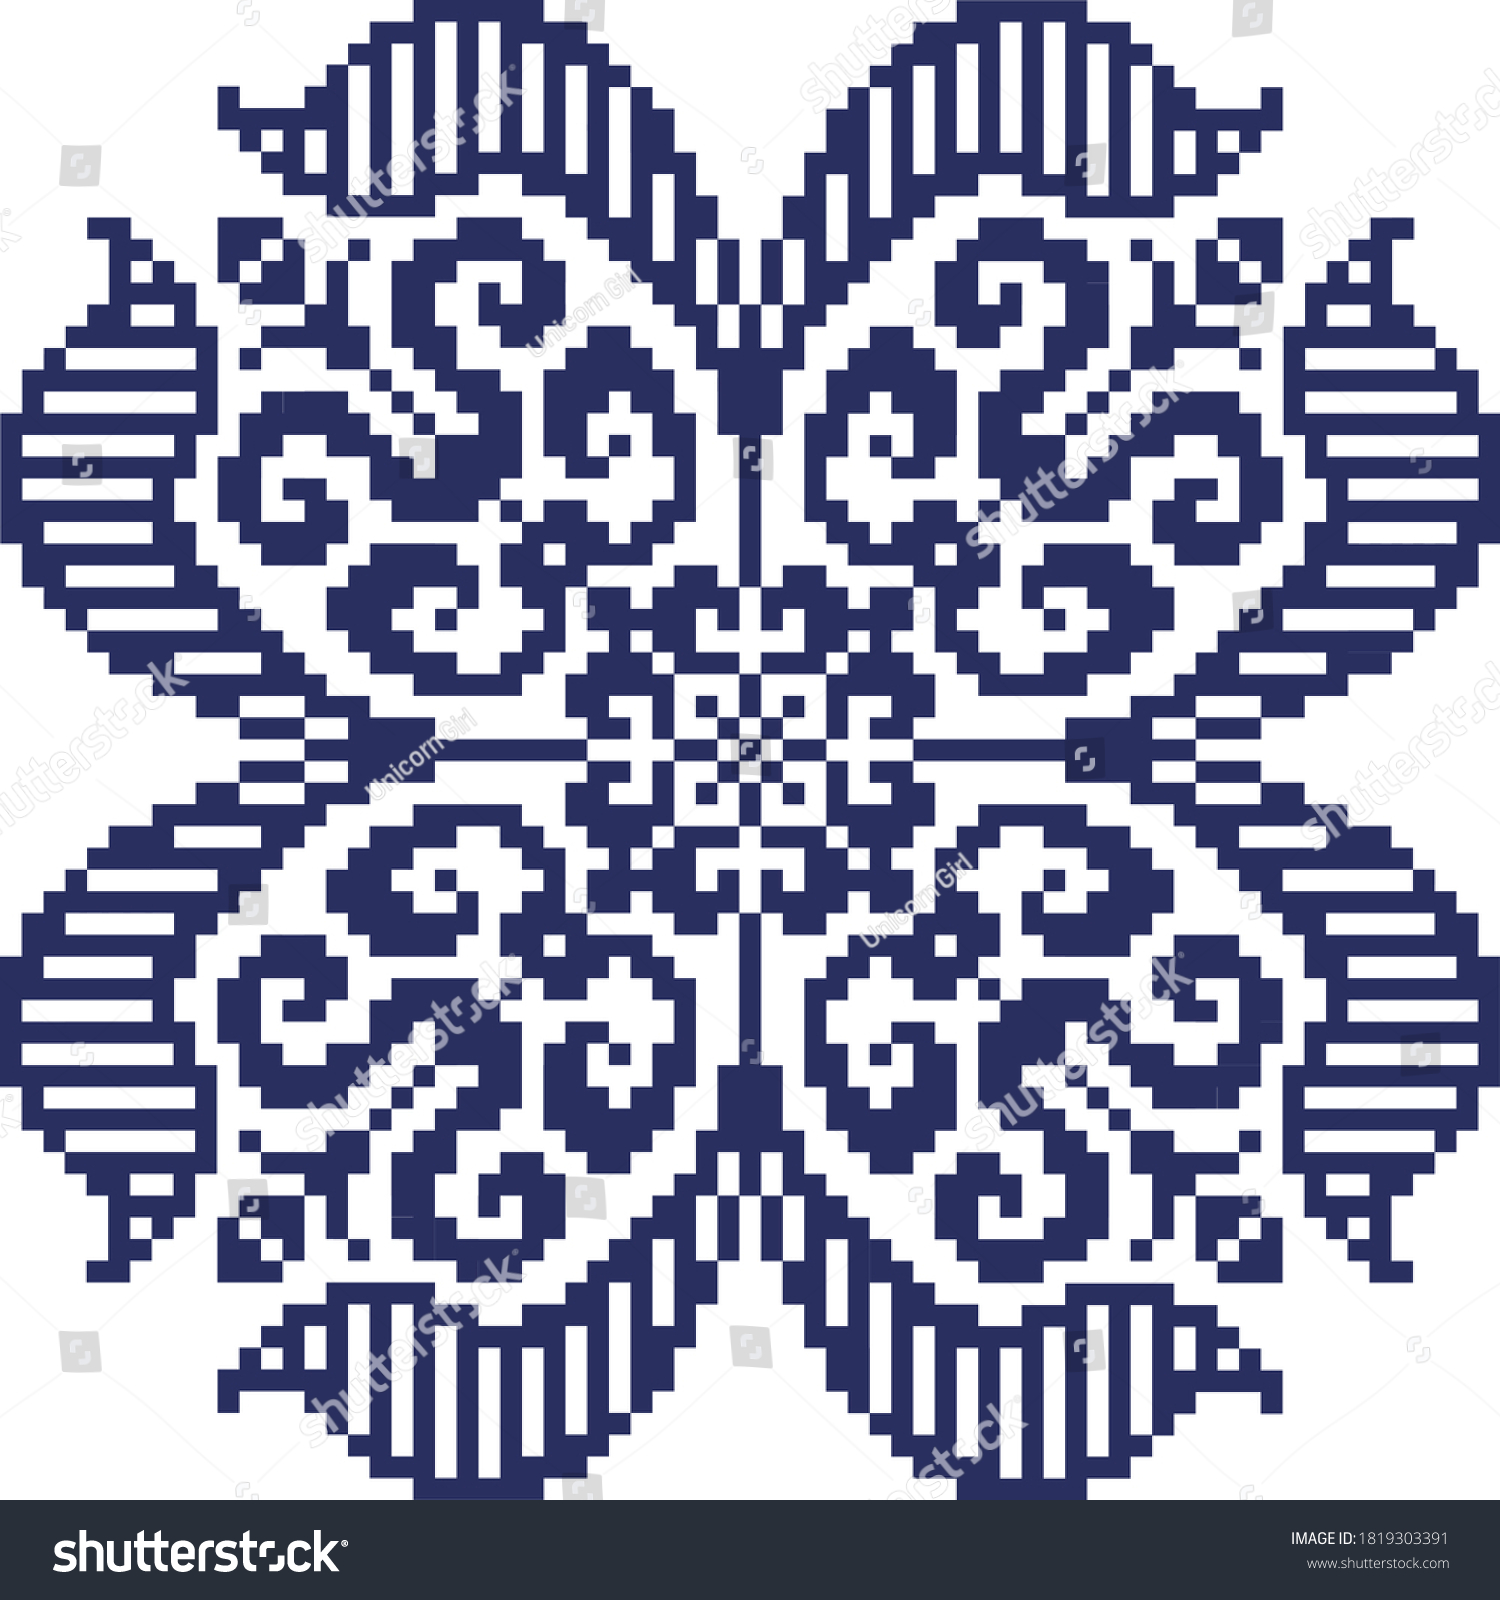 SVG of The scheme for cross-stitch flowers and leaves in blue svg